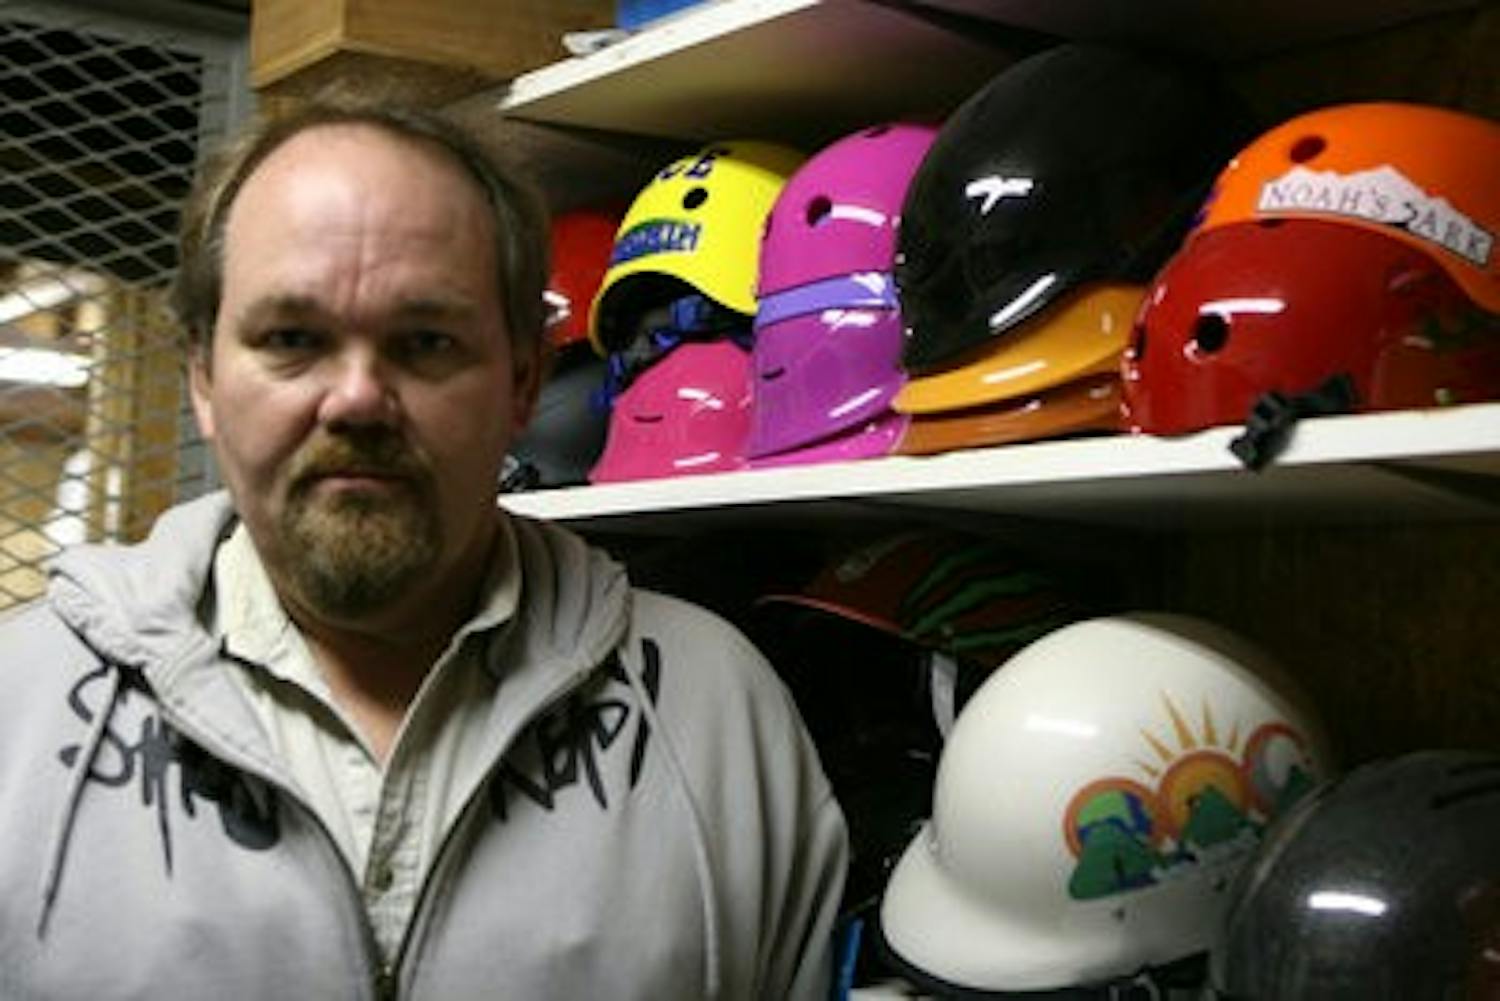 Tom Sherburne's professional kayaking career led him to co-found Shred Ready, a helmet manufacturer. (Rebecca Croomes / ASSISTANT PHOTO EDITOR)